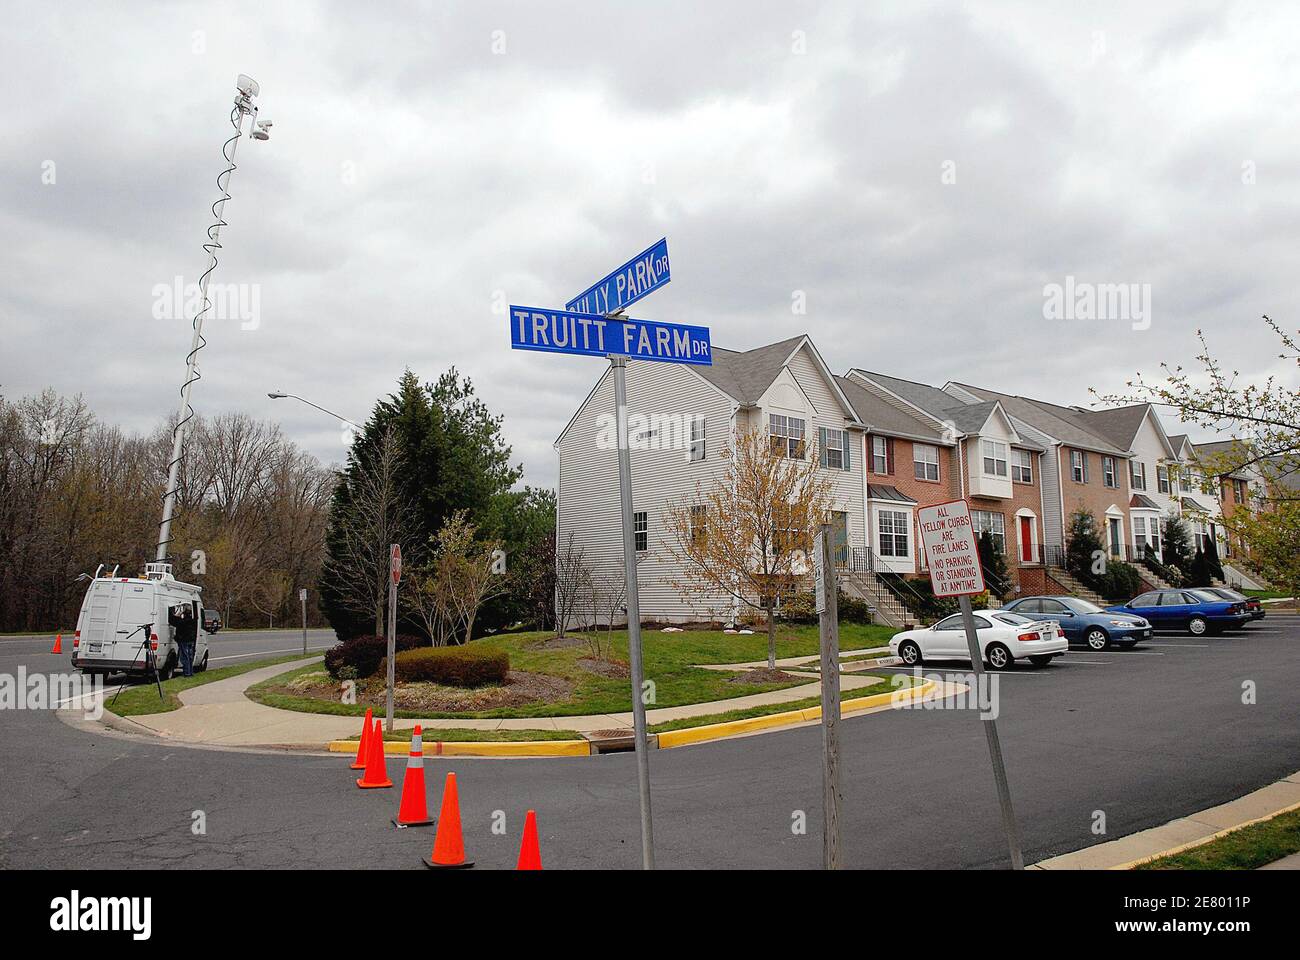 A news vqn is parked near the townhouse where Cho Seung-Hui lived in Centreville, VA, USA on April 18, 2007. Officials have named Seung-Hui, the 23-year-old South Korean native, as the suspect in the killing rampage at Virginia Tech yesterday killing 32 and self. Photo by Olivier Douliery/ABACAPRESS.COM Stock Photo